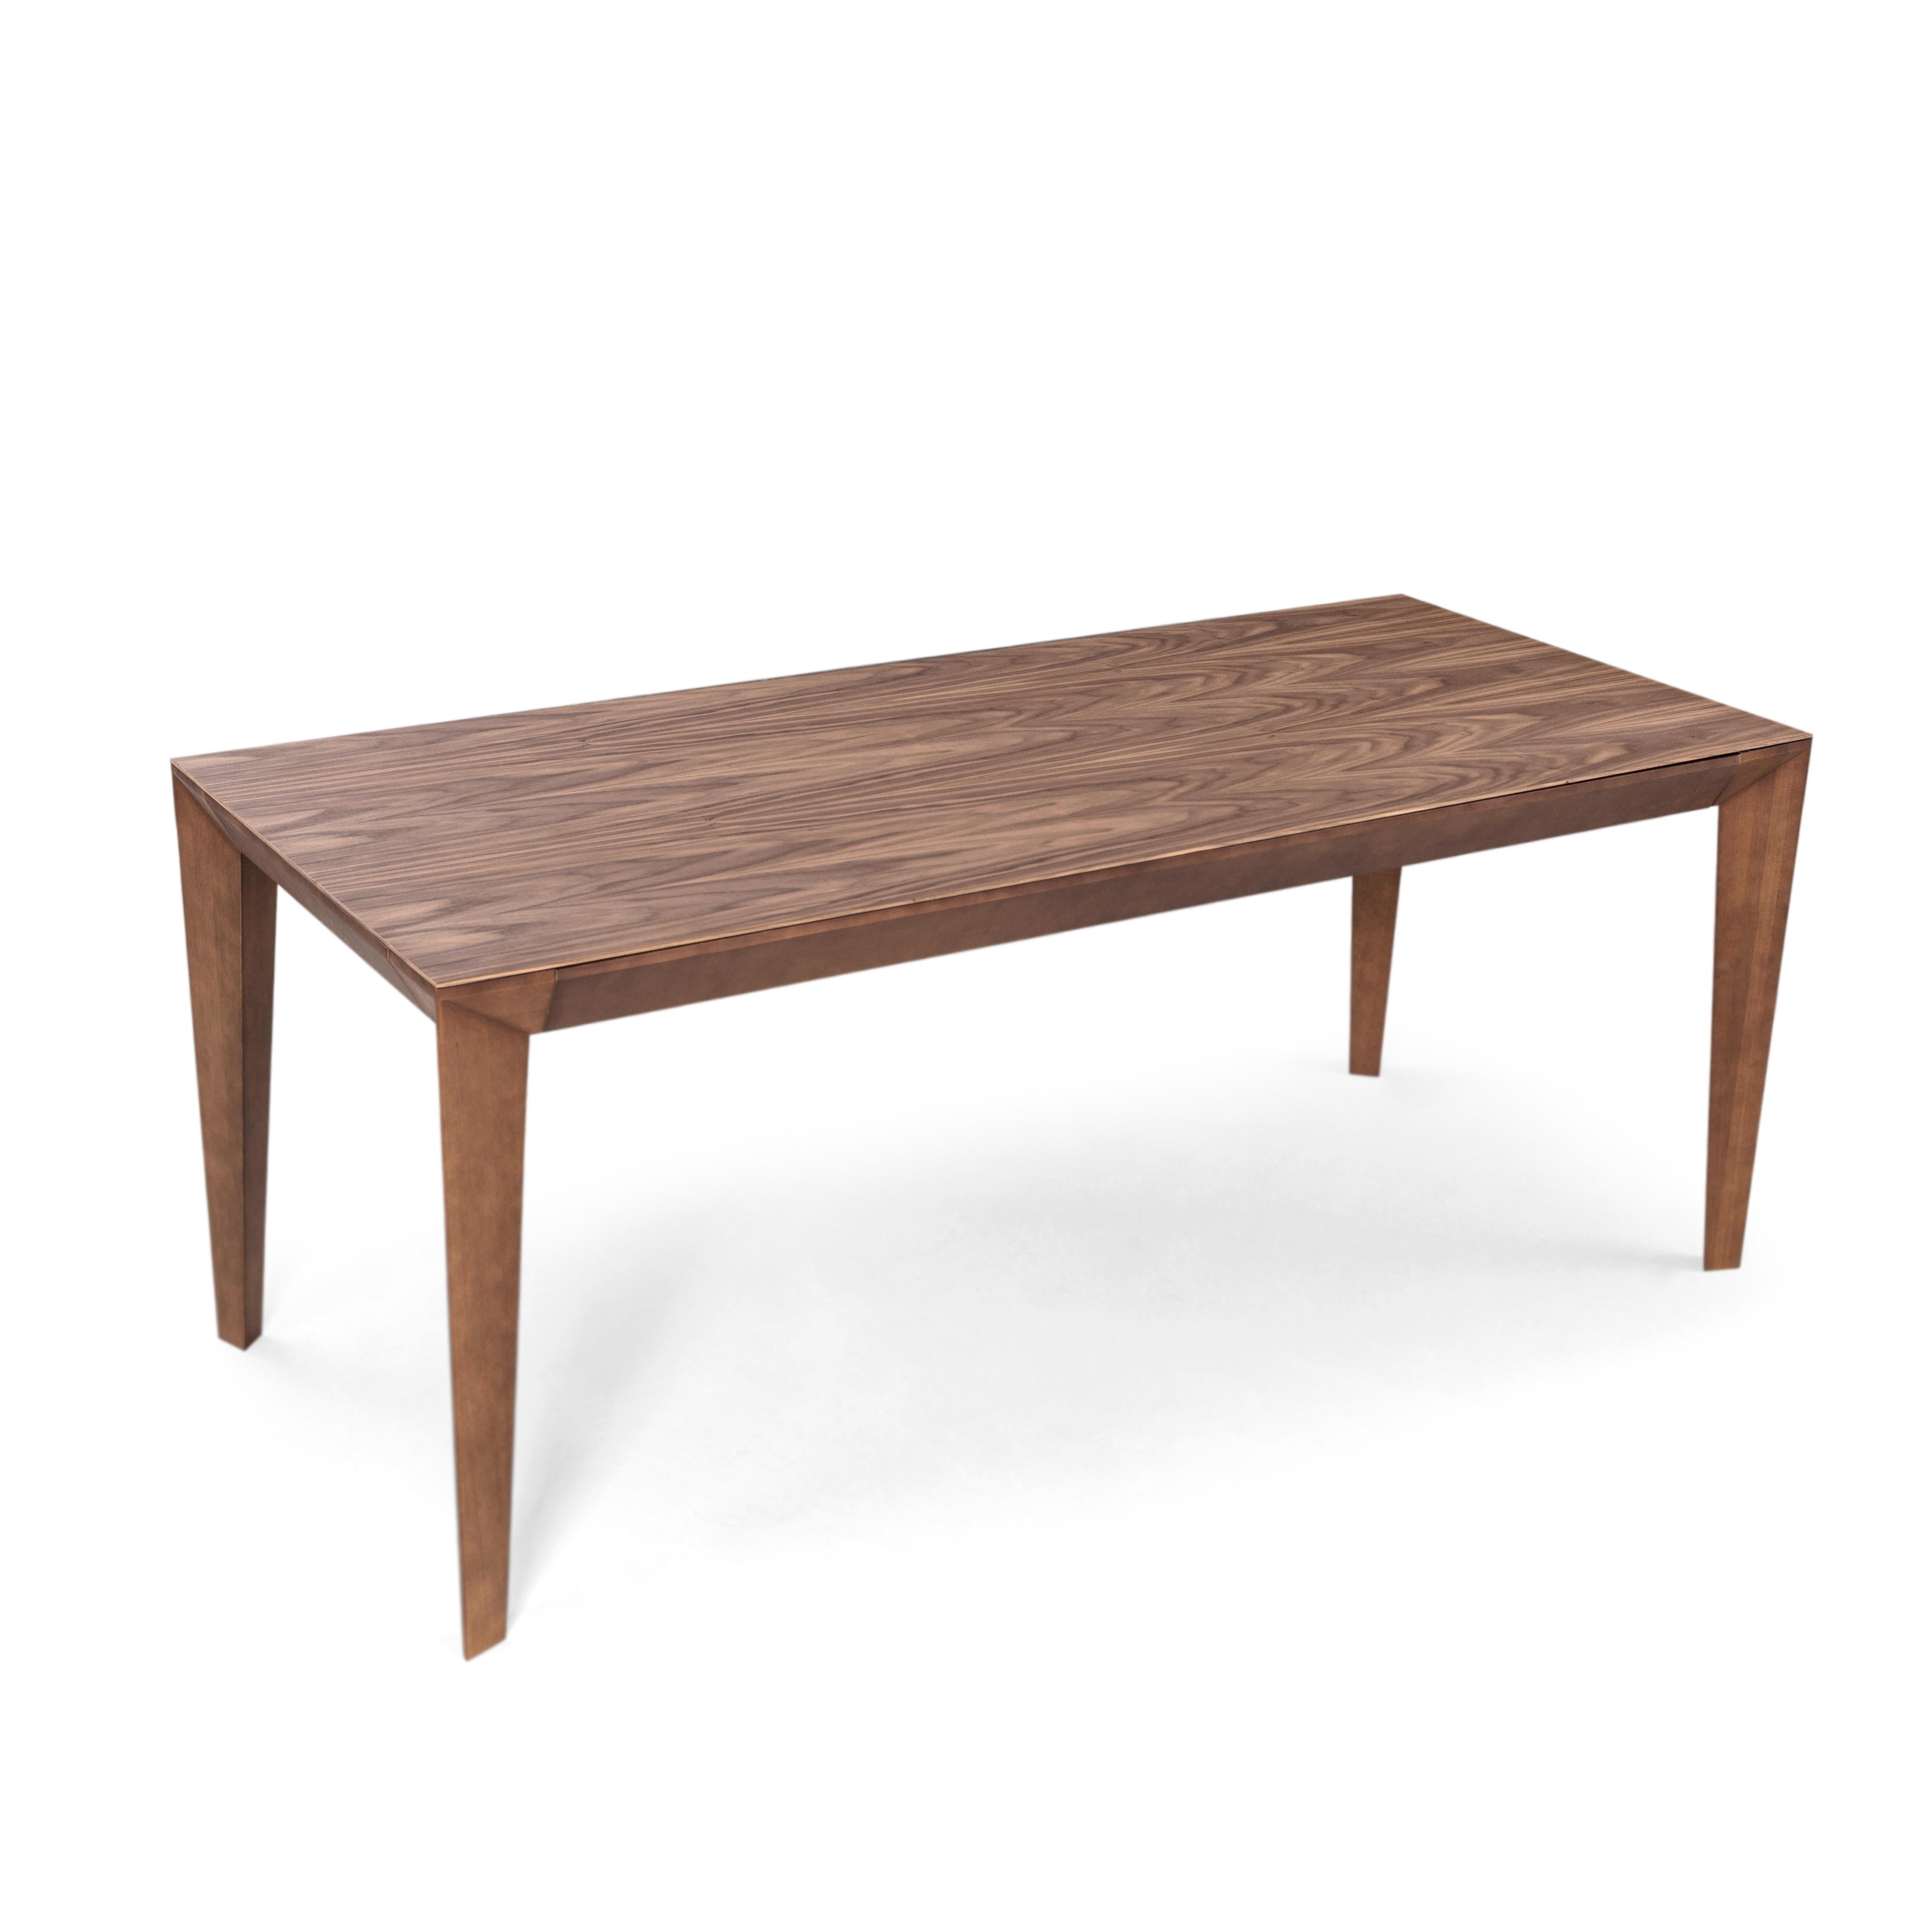 Contemporary Luce Rectangular Dining Table with a Walnut Wood Veneered Table Top 71'' For Sale